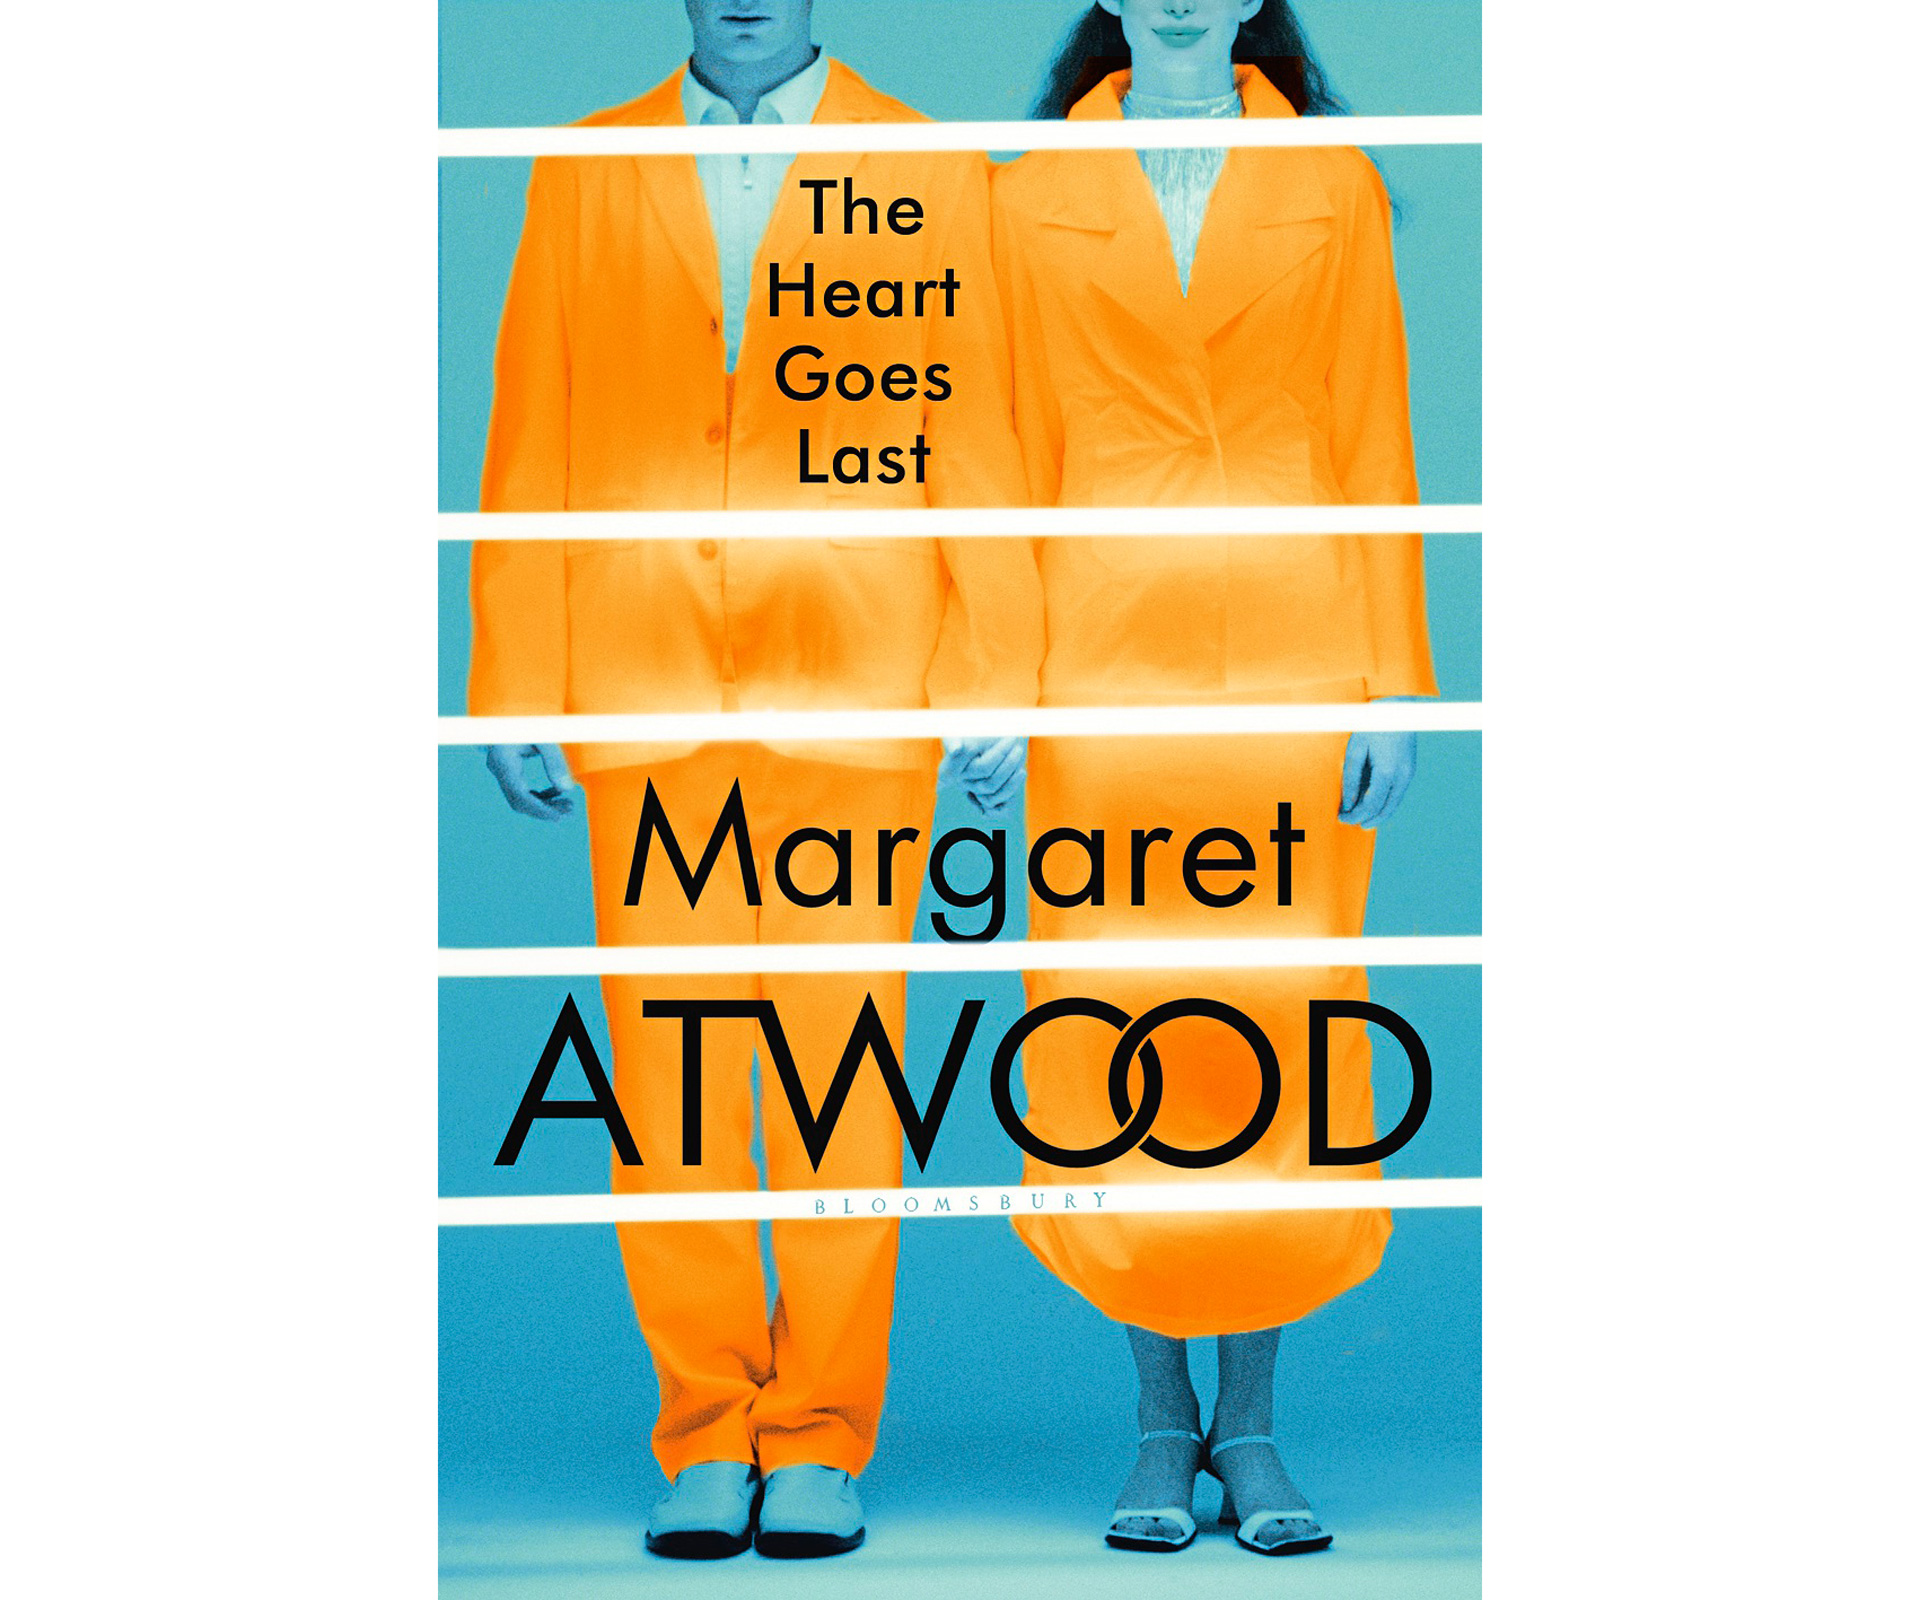 BOOK REVIEW: The Heart Goes Last